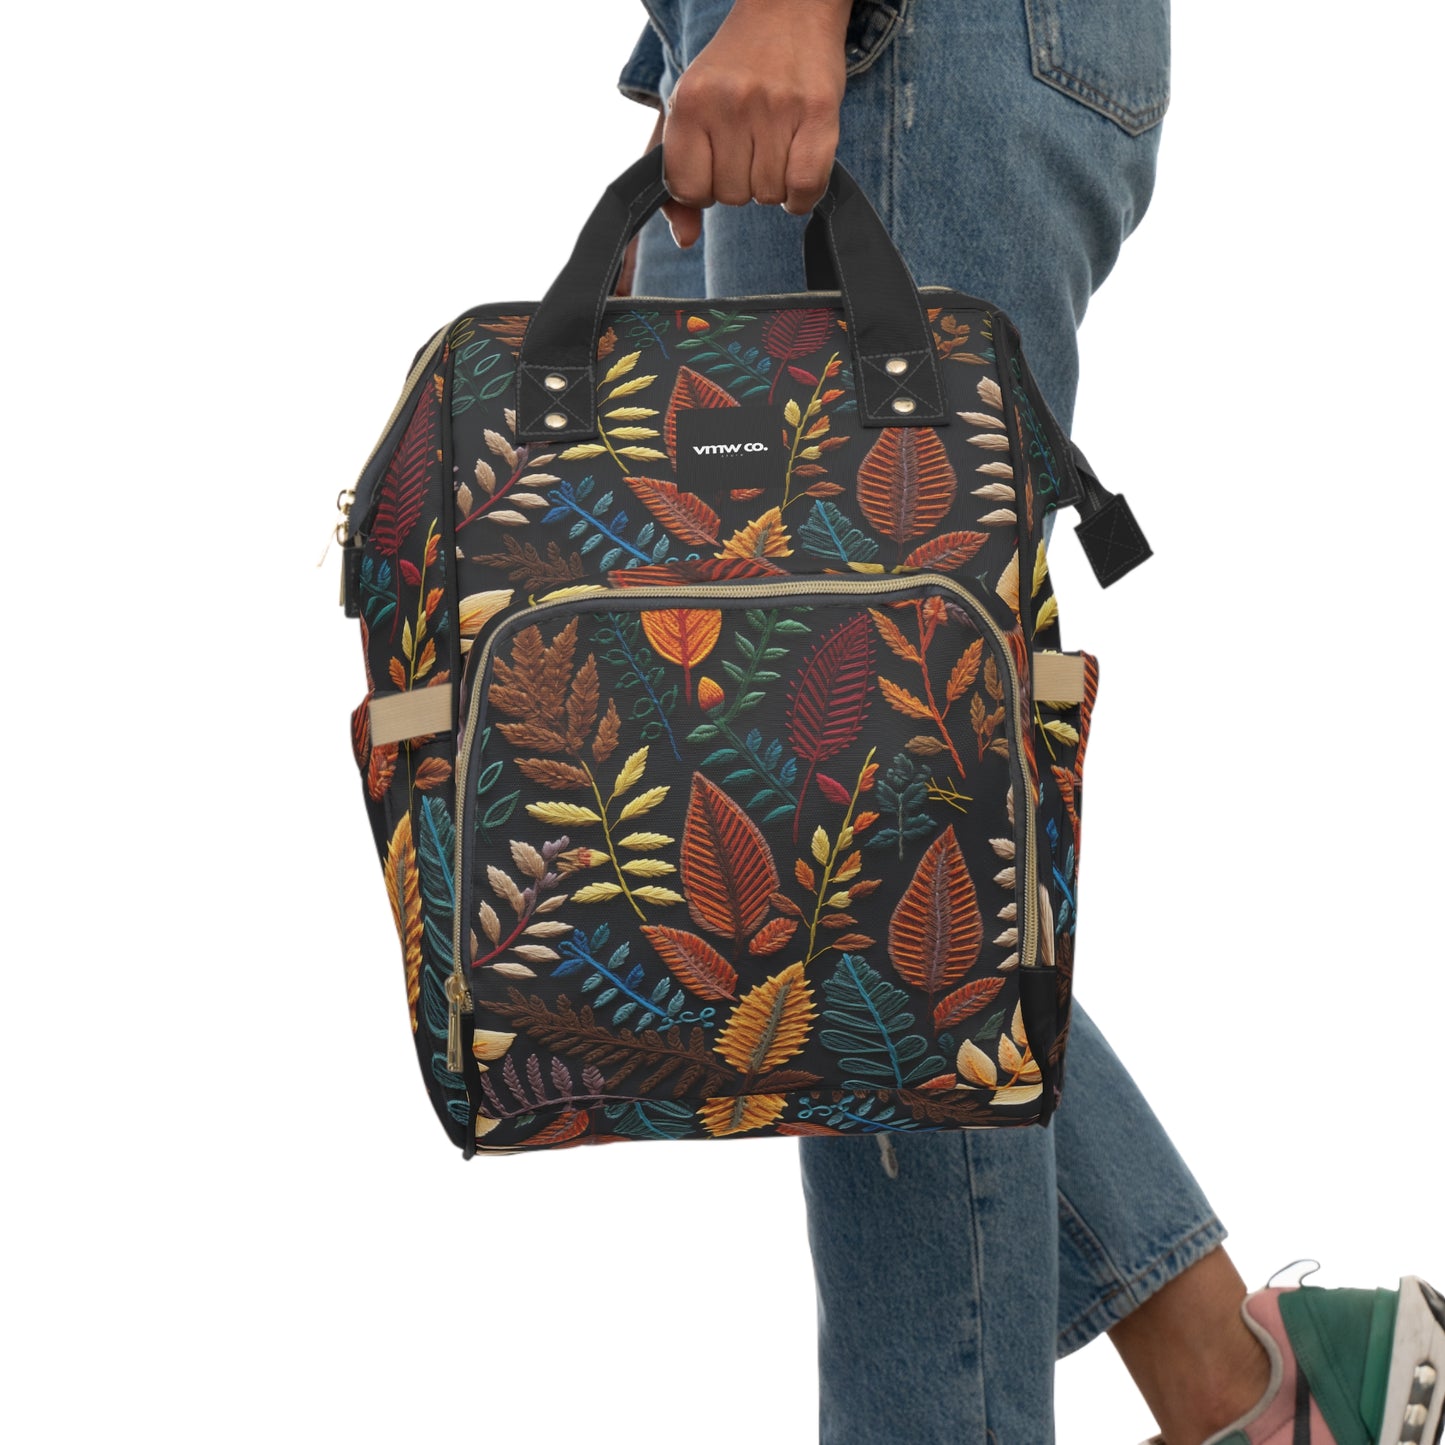 Embroidered Fall Leaves Multifunctional Diaper Backpack